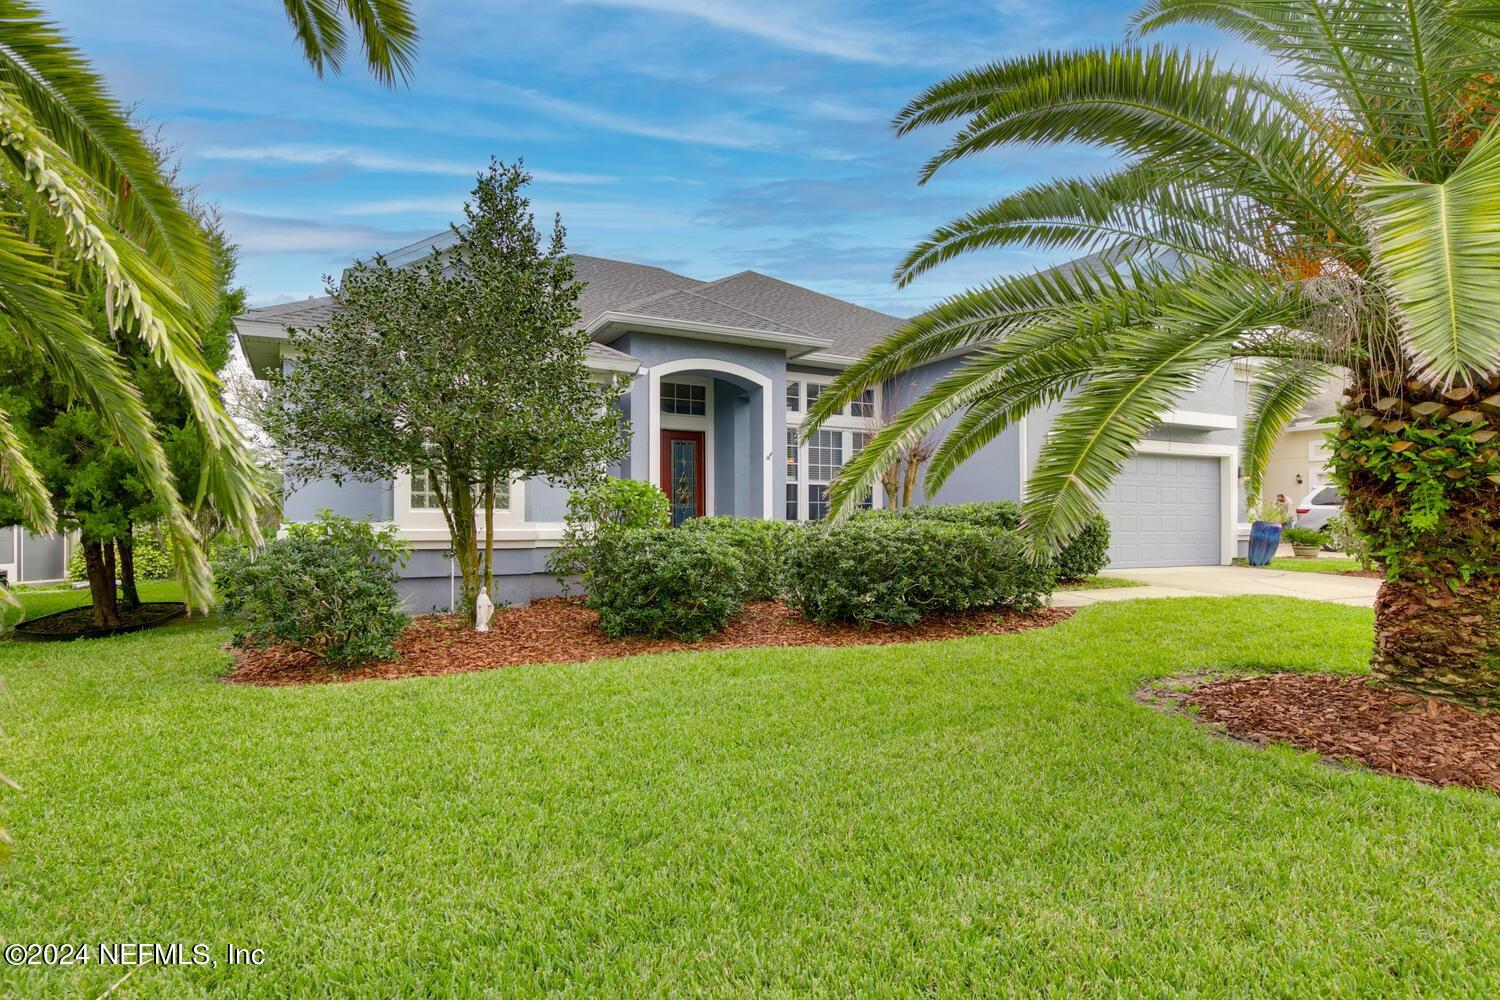 Property Image for 1120 S MARSH WIND Way